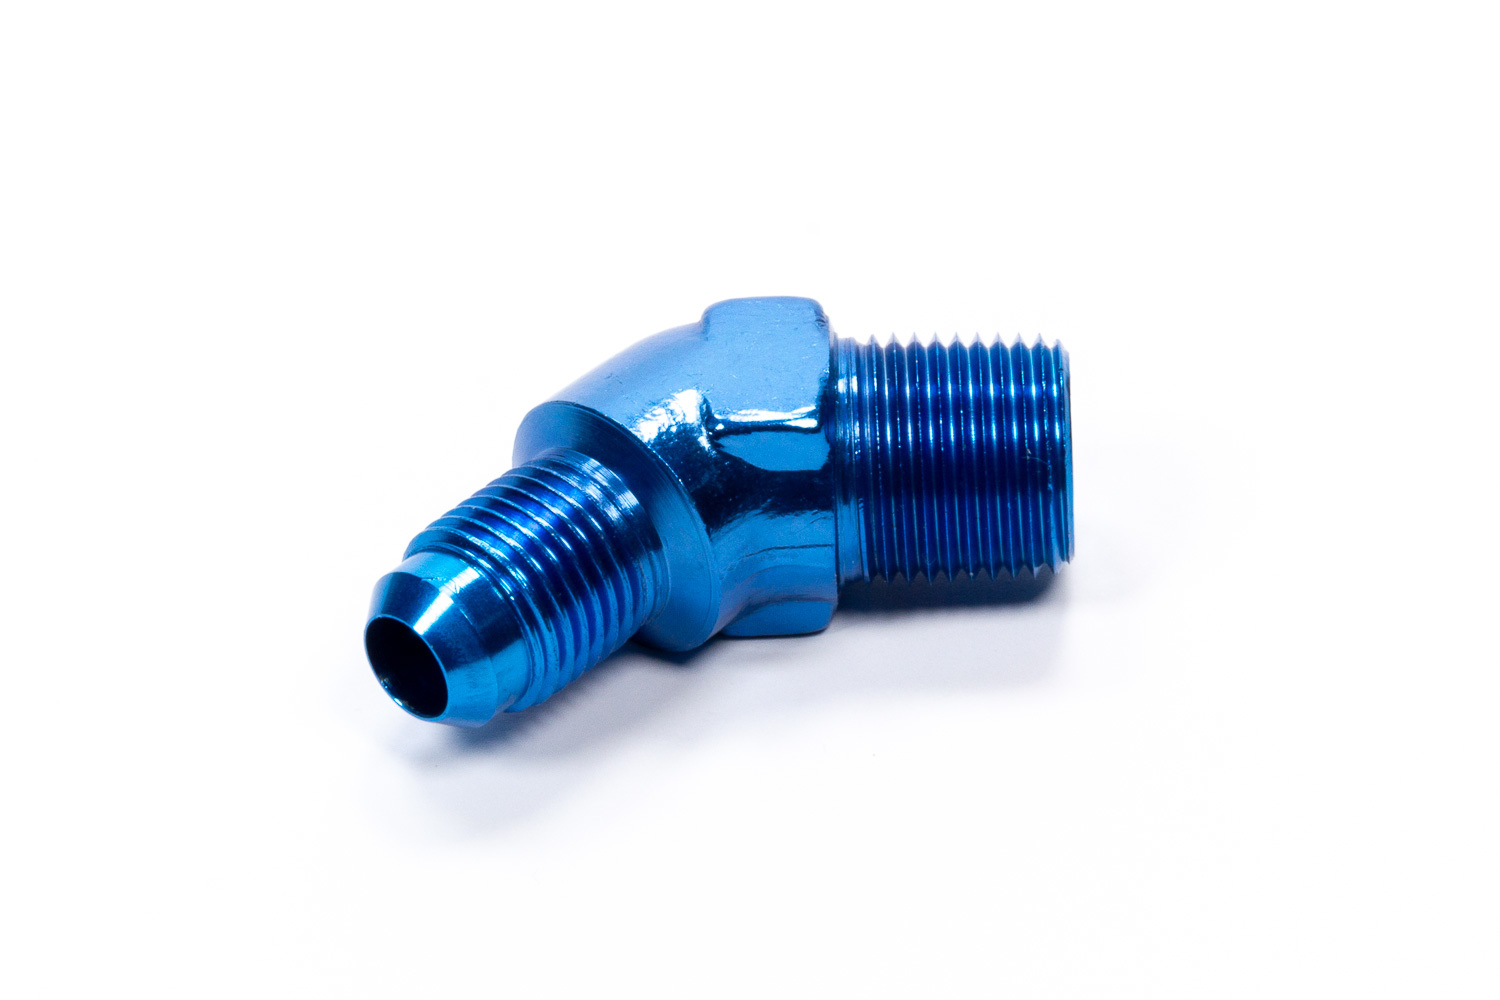 Fragola 482368 Fitting, Adapter, 45 Degree, 6 AN Male to 1/2 in NPT Male, Aluminum, Blue Anodized, Each